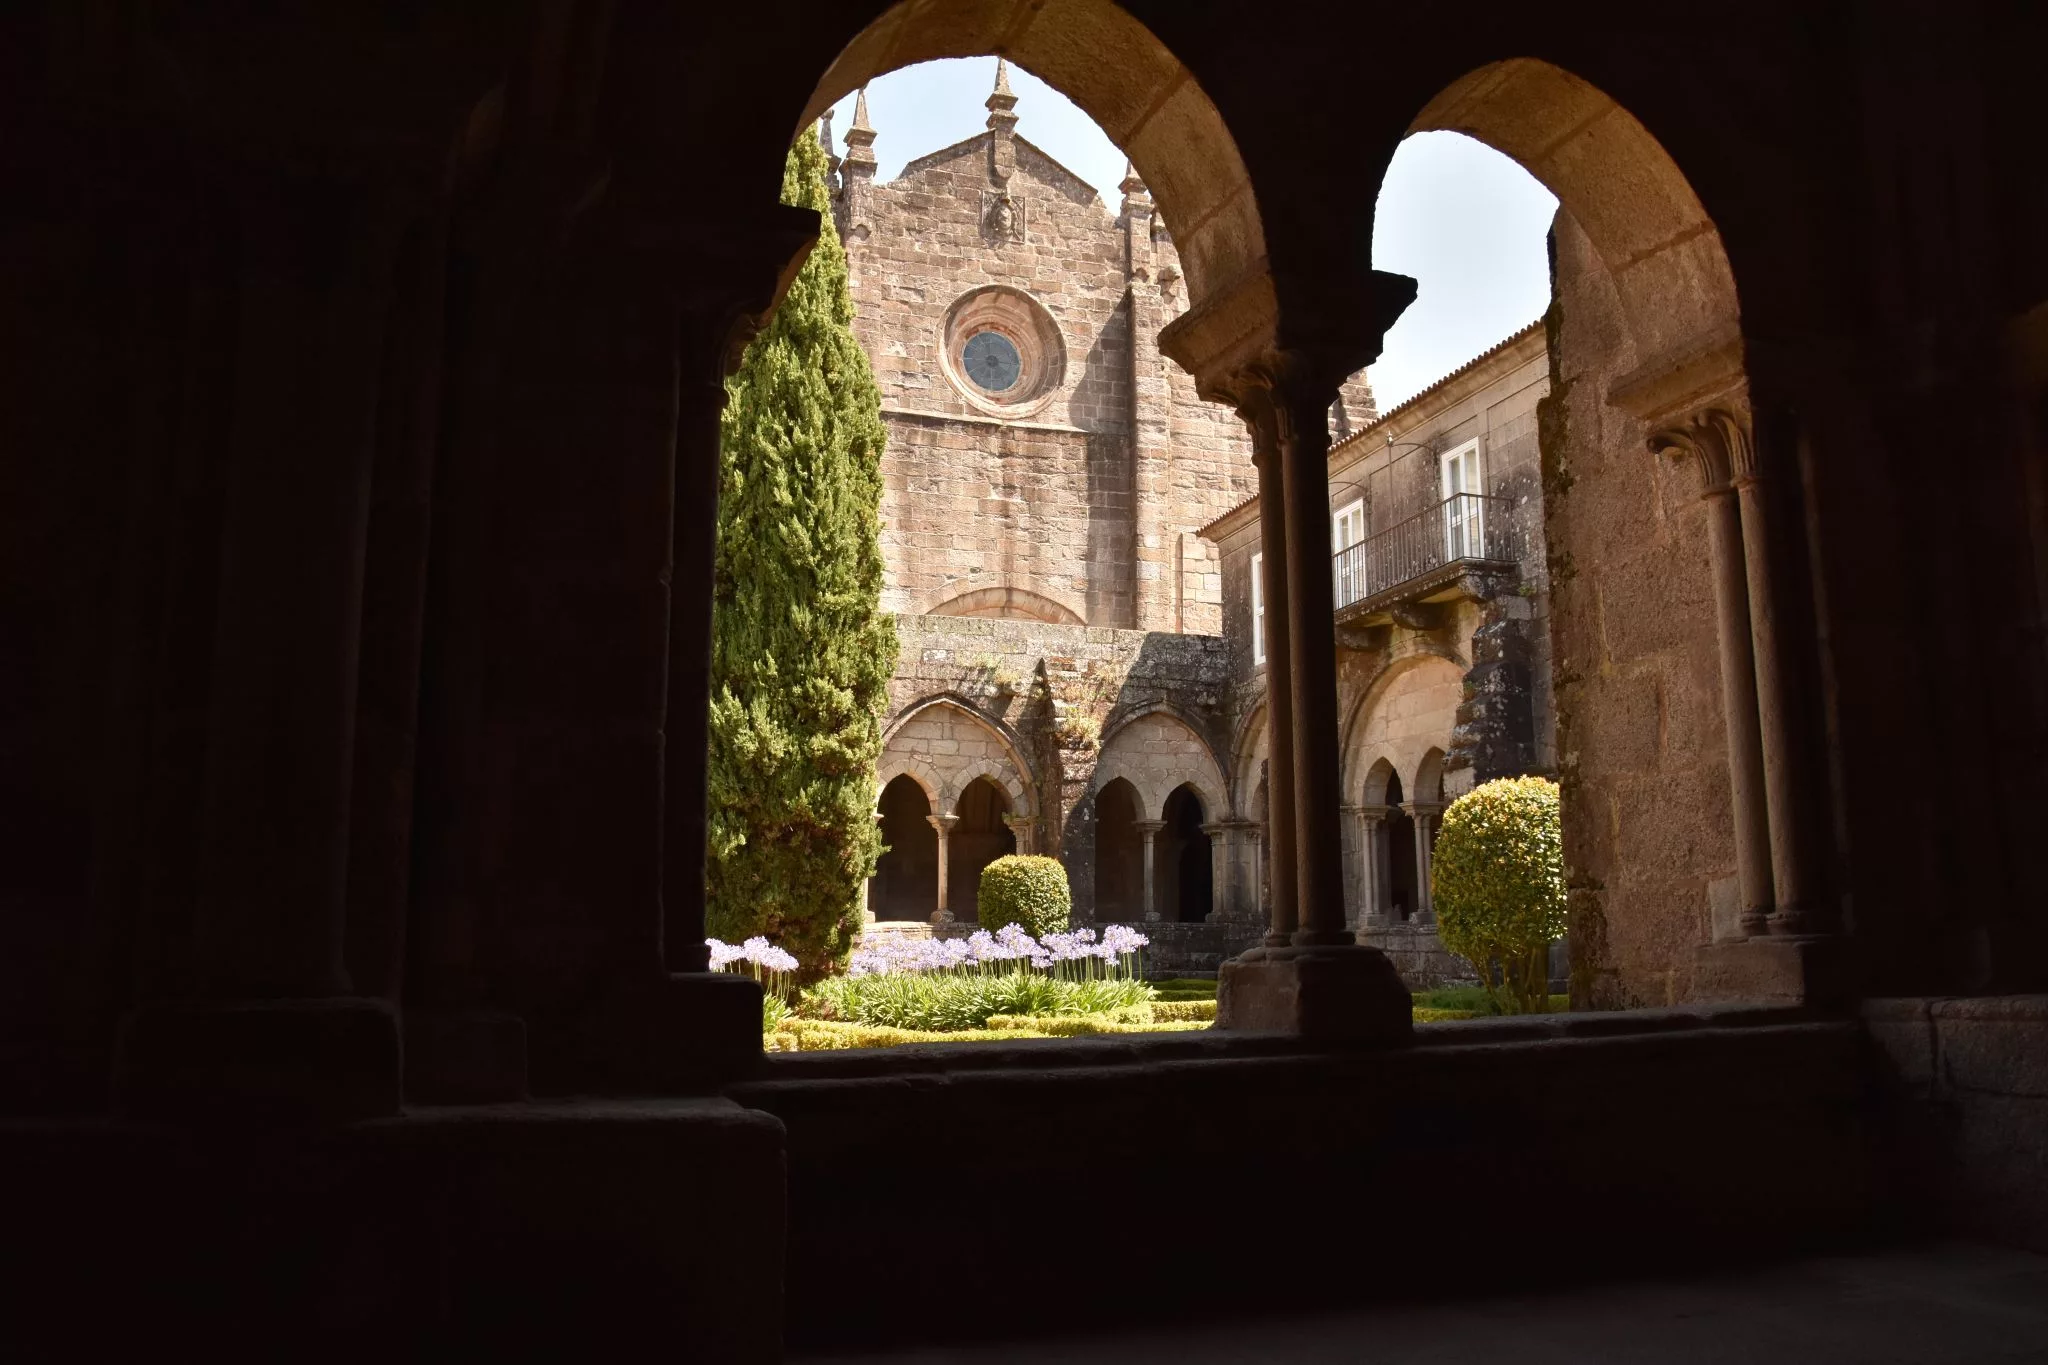 Cathedral cloister, Spain